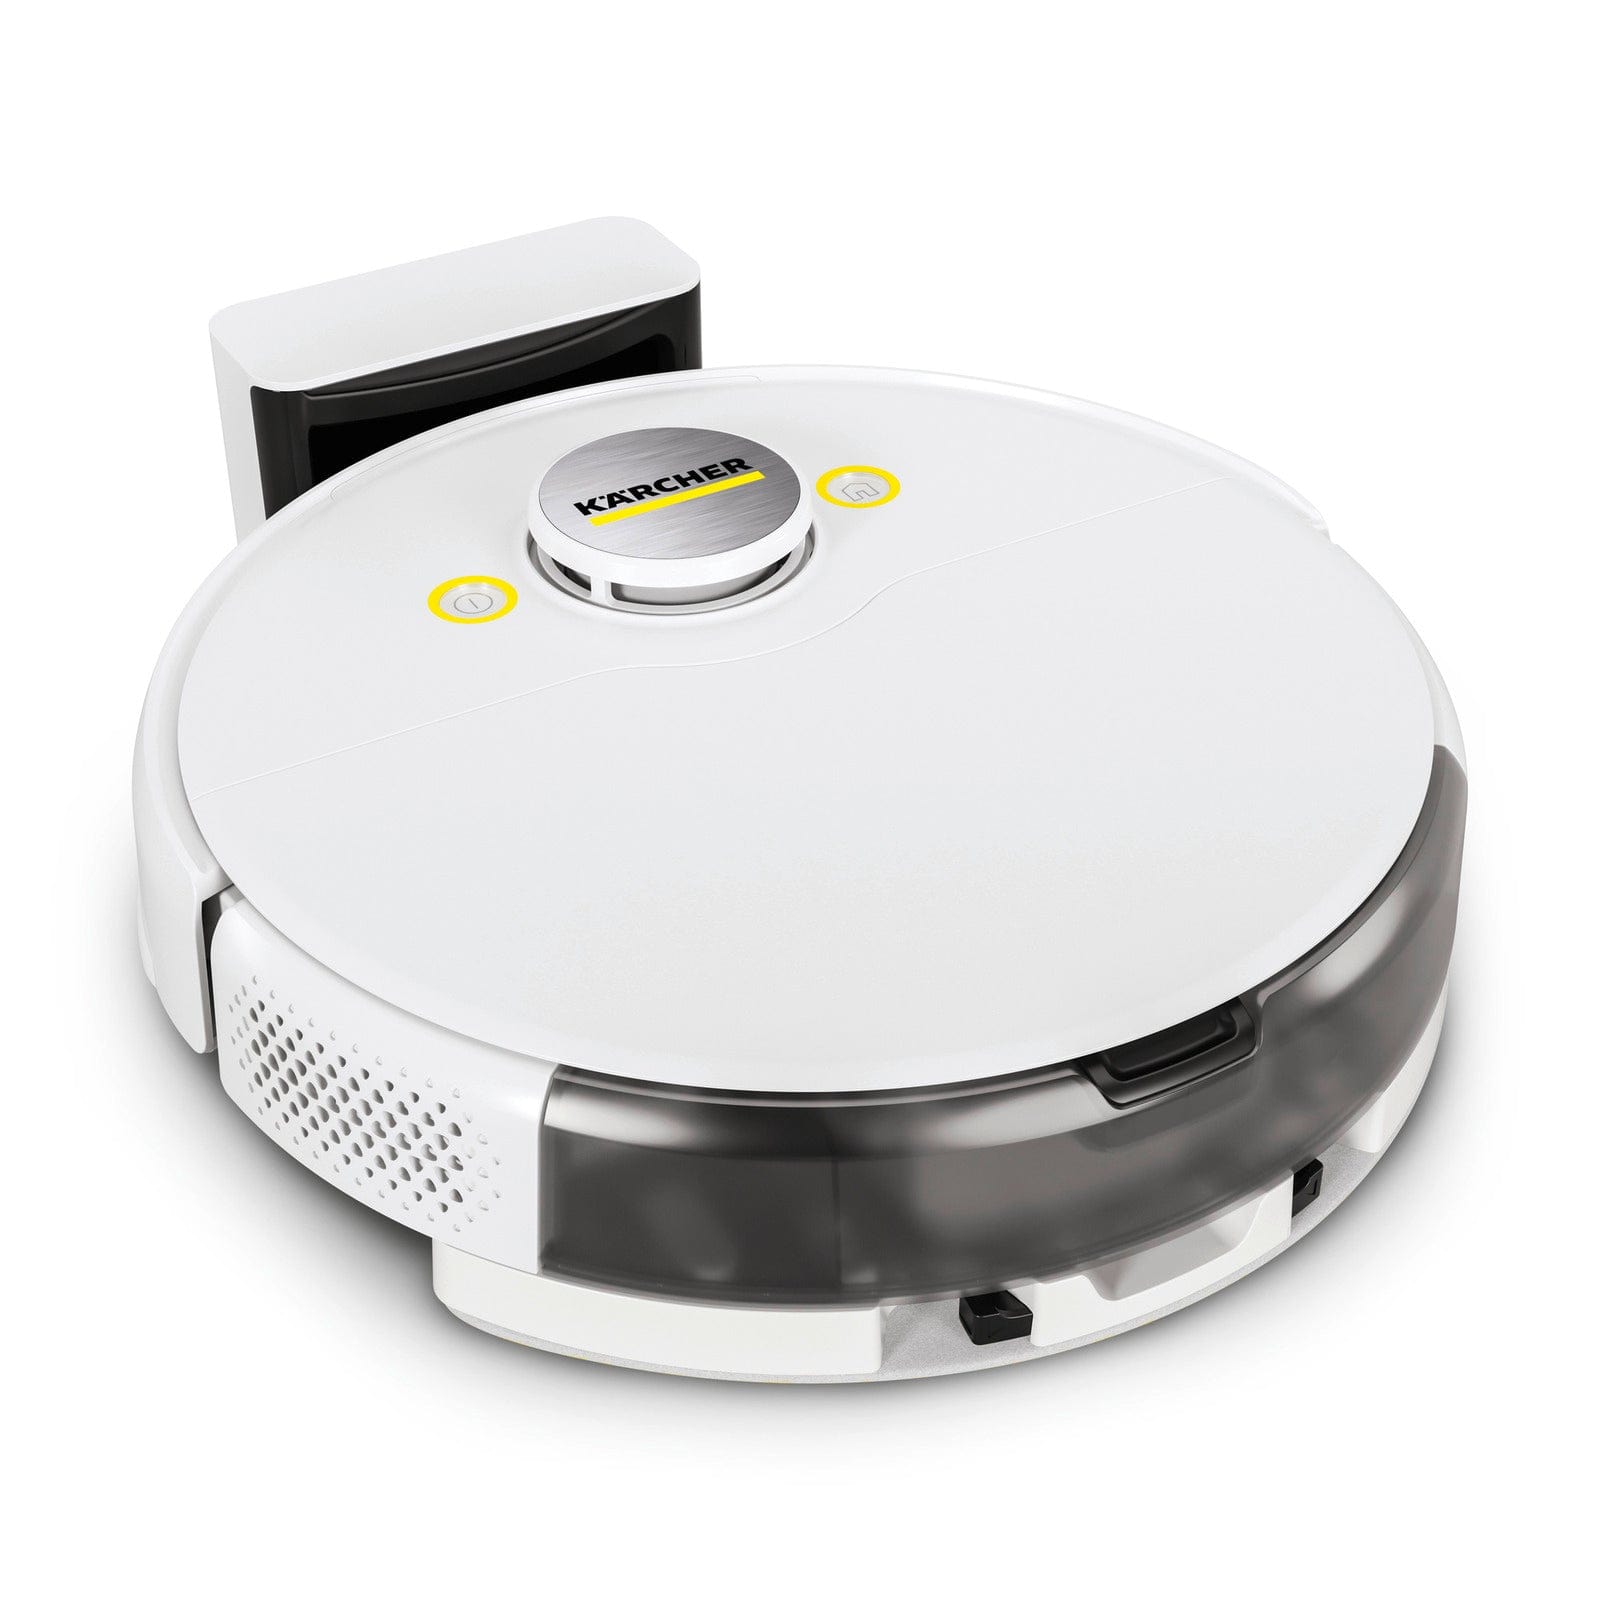 Karcher Robot Vacuum Cleaner with Wiping Function RCV 3 | Supply Master Accra, Ghana Steam & Vacuum Cleaner Buy Tools hardware Building materials